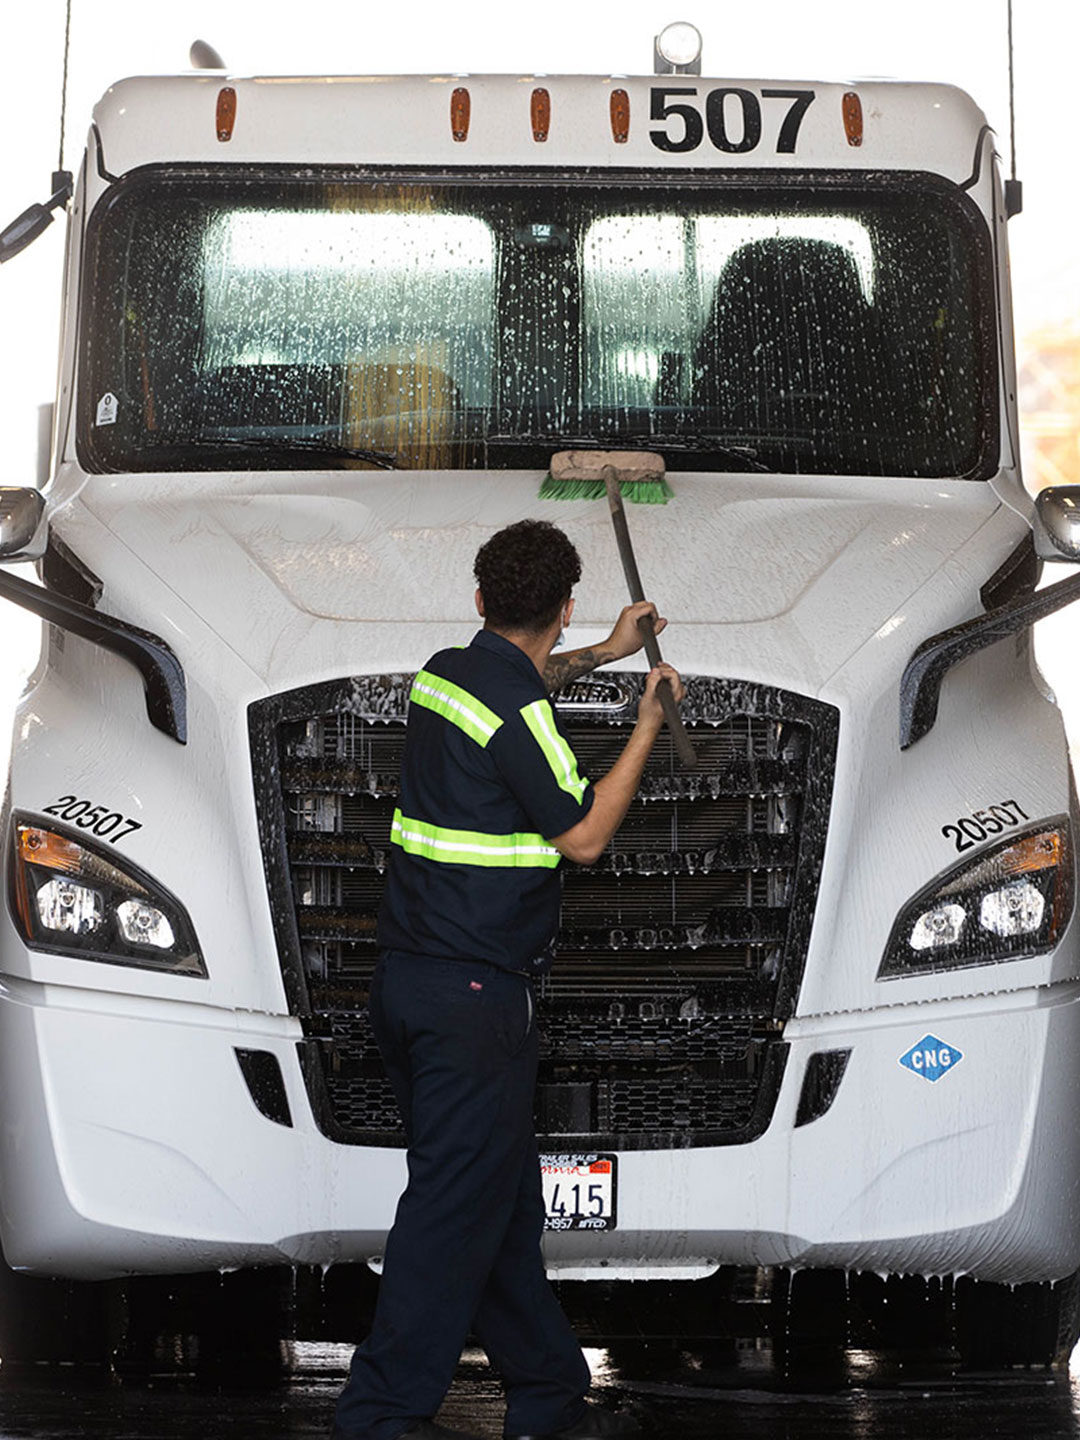 Technician cleaning front hood of Semi cab